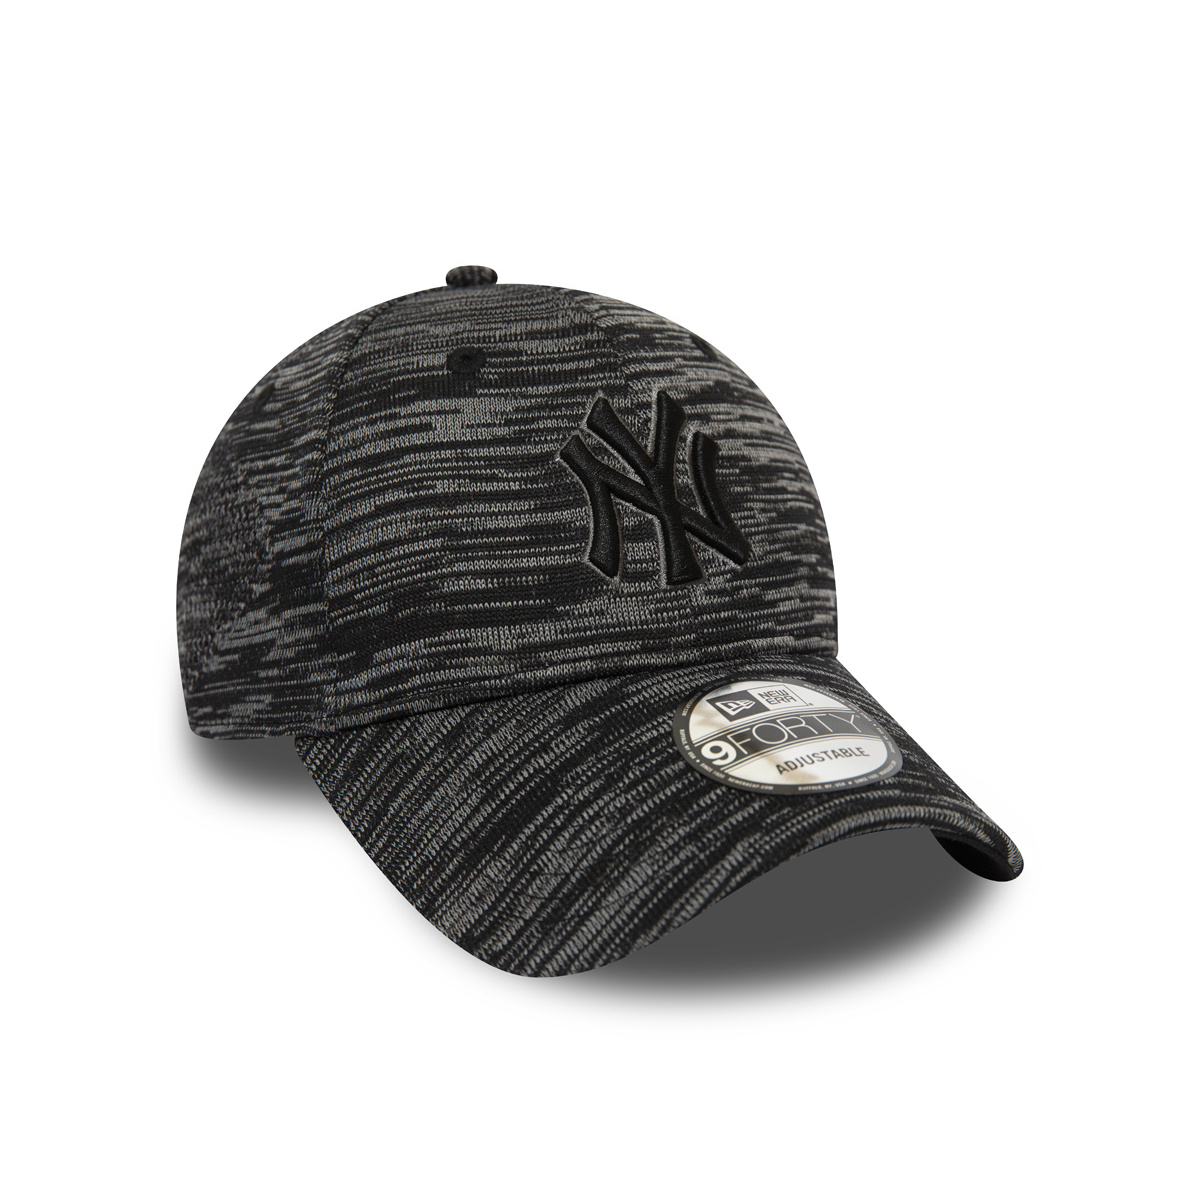 Casquette Yankees Engineered Fit 9FORTY Grise- New Era Reference : 9548